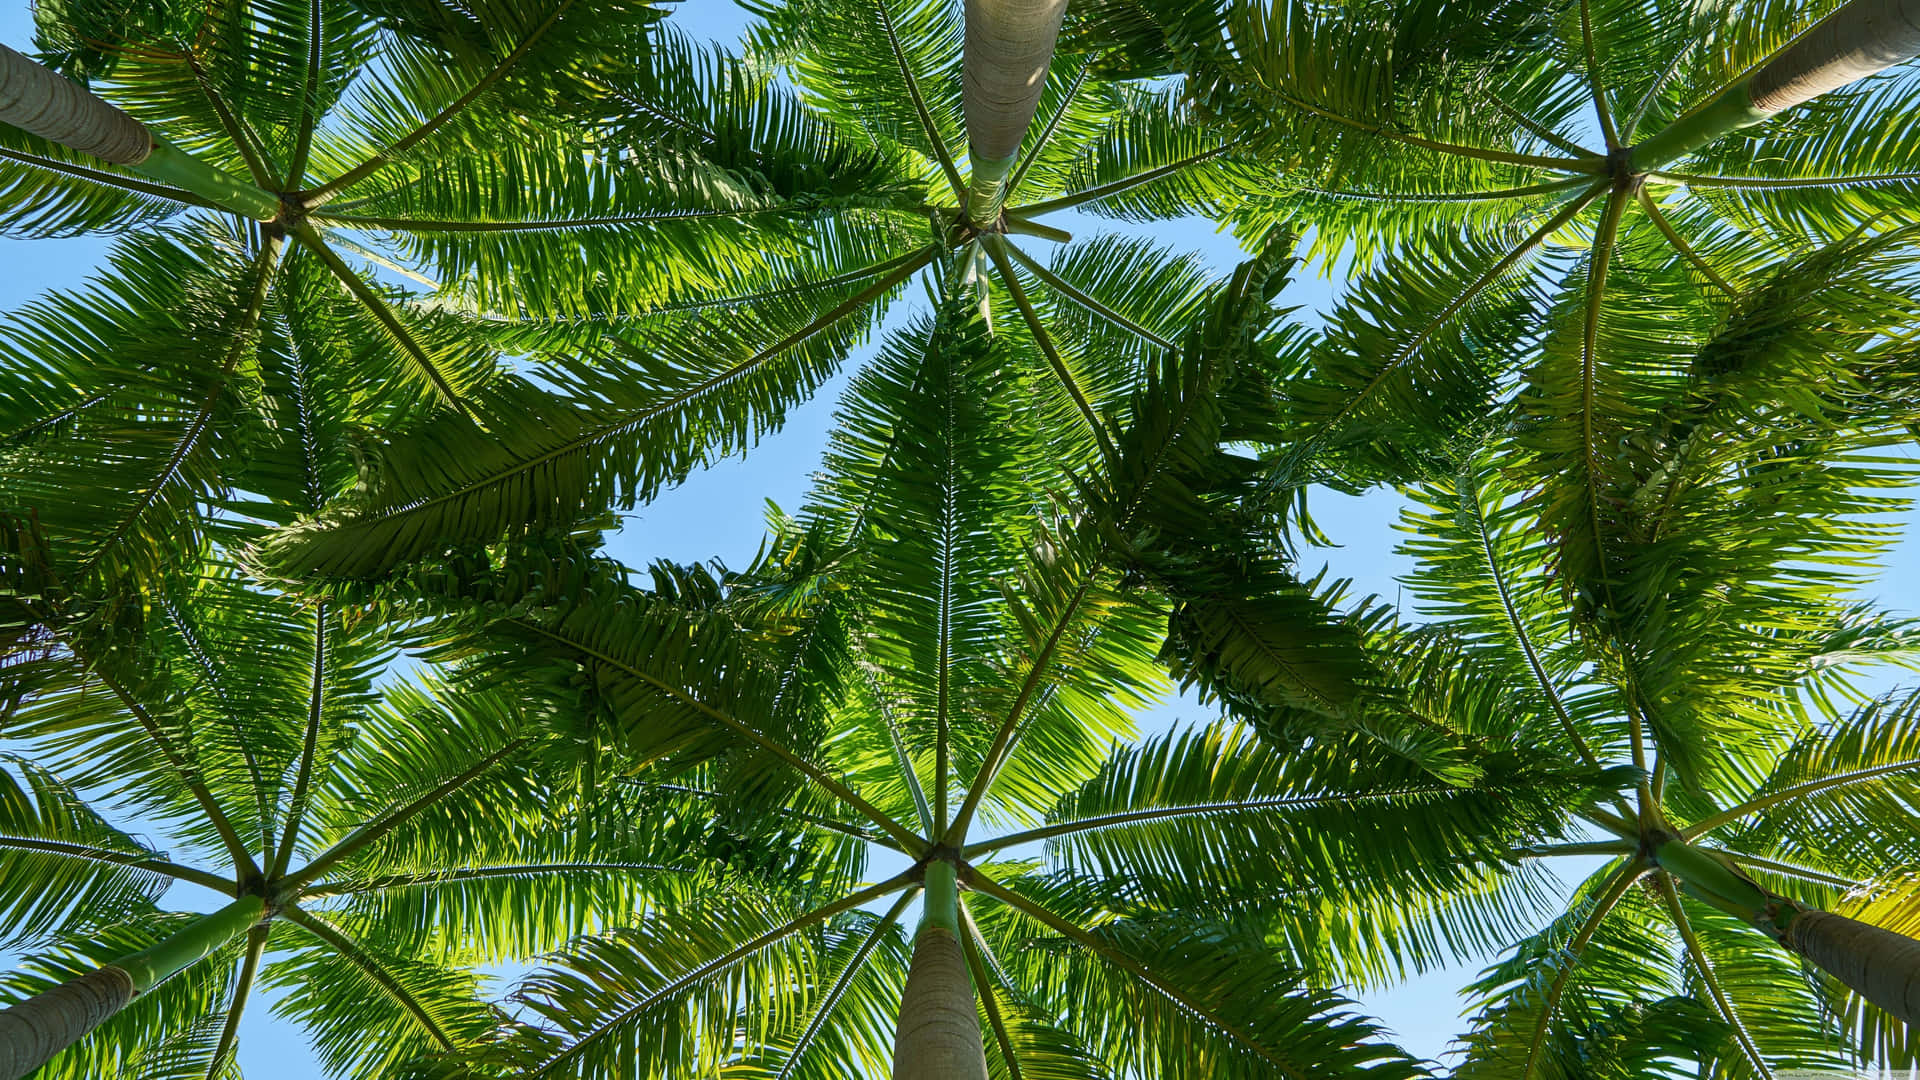 Tropical Leaves and Natural Beauty for Your Desktop Wallpaper